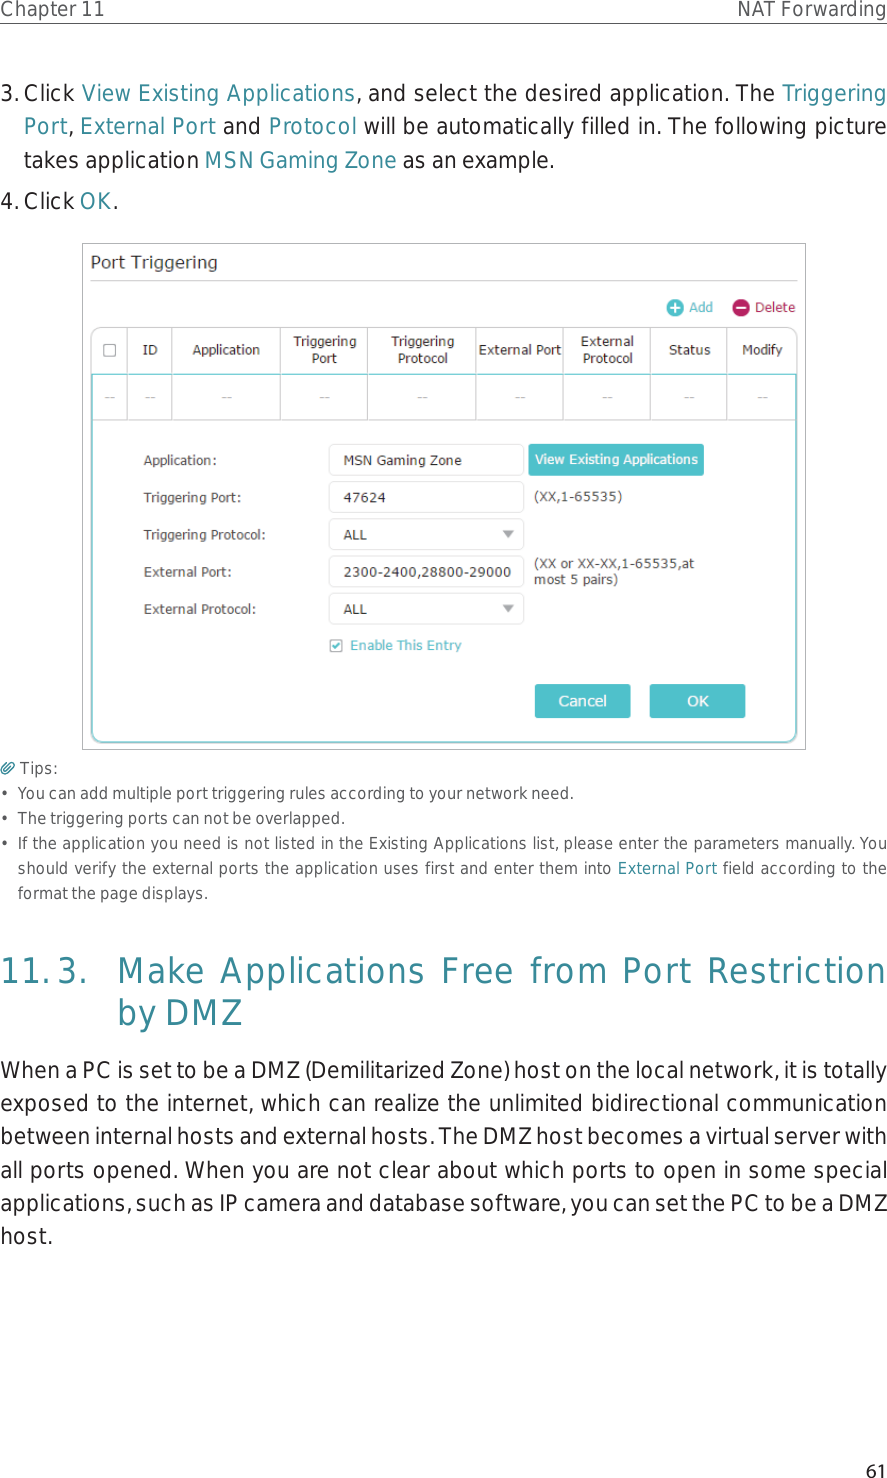 61Chapter 11 NAT Forwarding3. Click View Existing Applications, and select the desired application. The Triggering Port, External Port and Protocol will be automatically filled in. The following picture takes application MSN Gaming Zone as an example.4. Click OK.Tips:•  You can add multiple port triggering rules according to your network need.•  The triggering ports can not be overlapped.•  If the application you need is not listed in the Existing Applications list, please enter the parameters manually. You should verify the external ports the application uses first and enter them into External Port field according to the format the page displays.11. 3.  Make Applications Free from Port Restriction by DMZWhen a PC is set to be a DMZ (Demilitarized Zone) host on the local network, it is totally exposed to the internet, which can realize the unlimited bidirectional communication between internal hosts and external hosts. The DMZ host becomes a virtual server with all ports opened. When you are not clear about which ports to open in some special applications, such as IP camera and database software, you can set the PC to be a DMZ host.